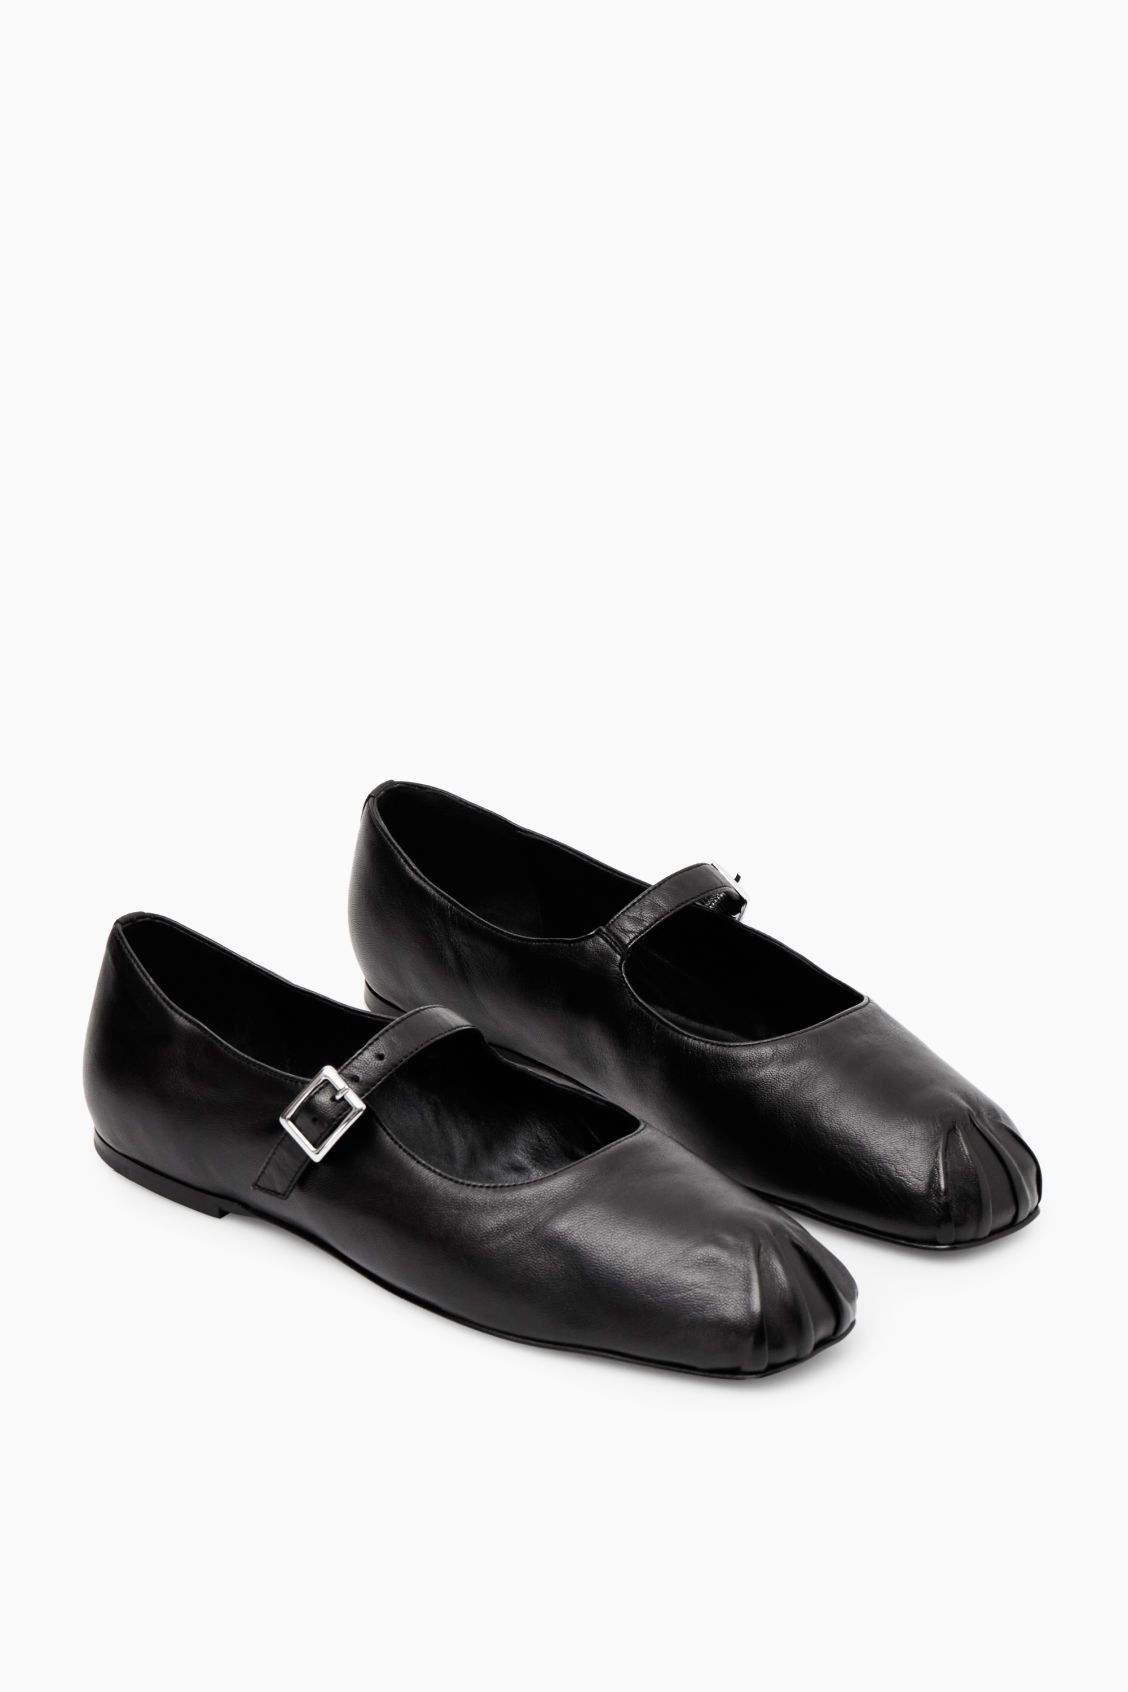 PLEATED LEATHER MARY-JANE BALLET FLATS - BLACK - COS | COS UK